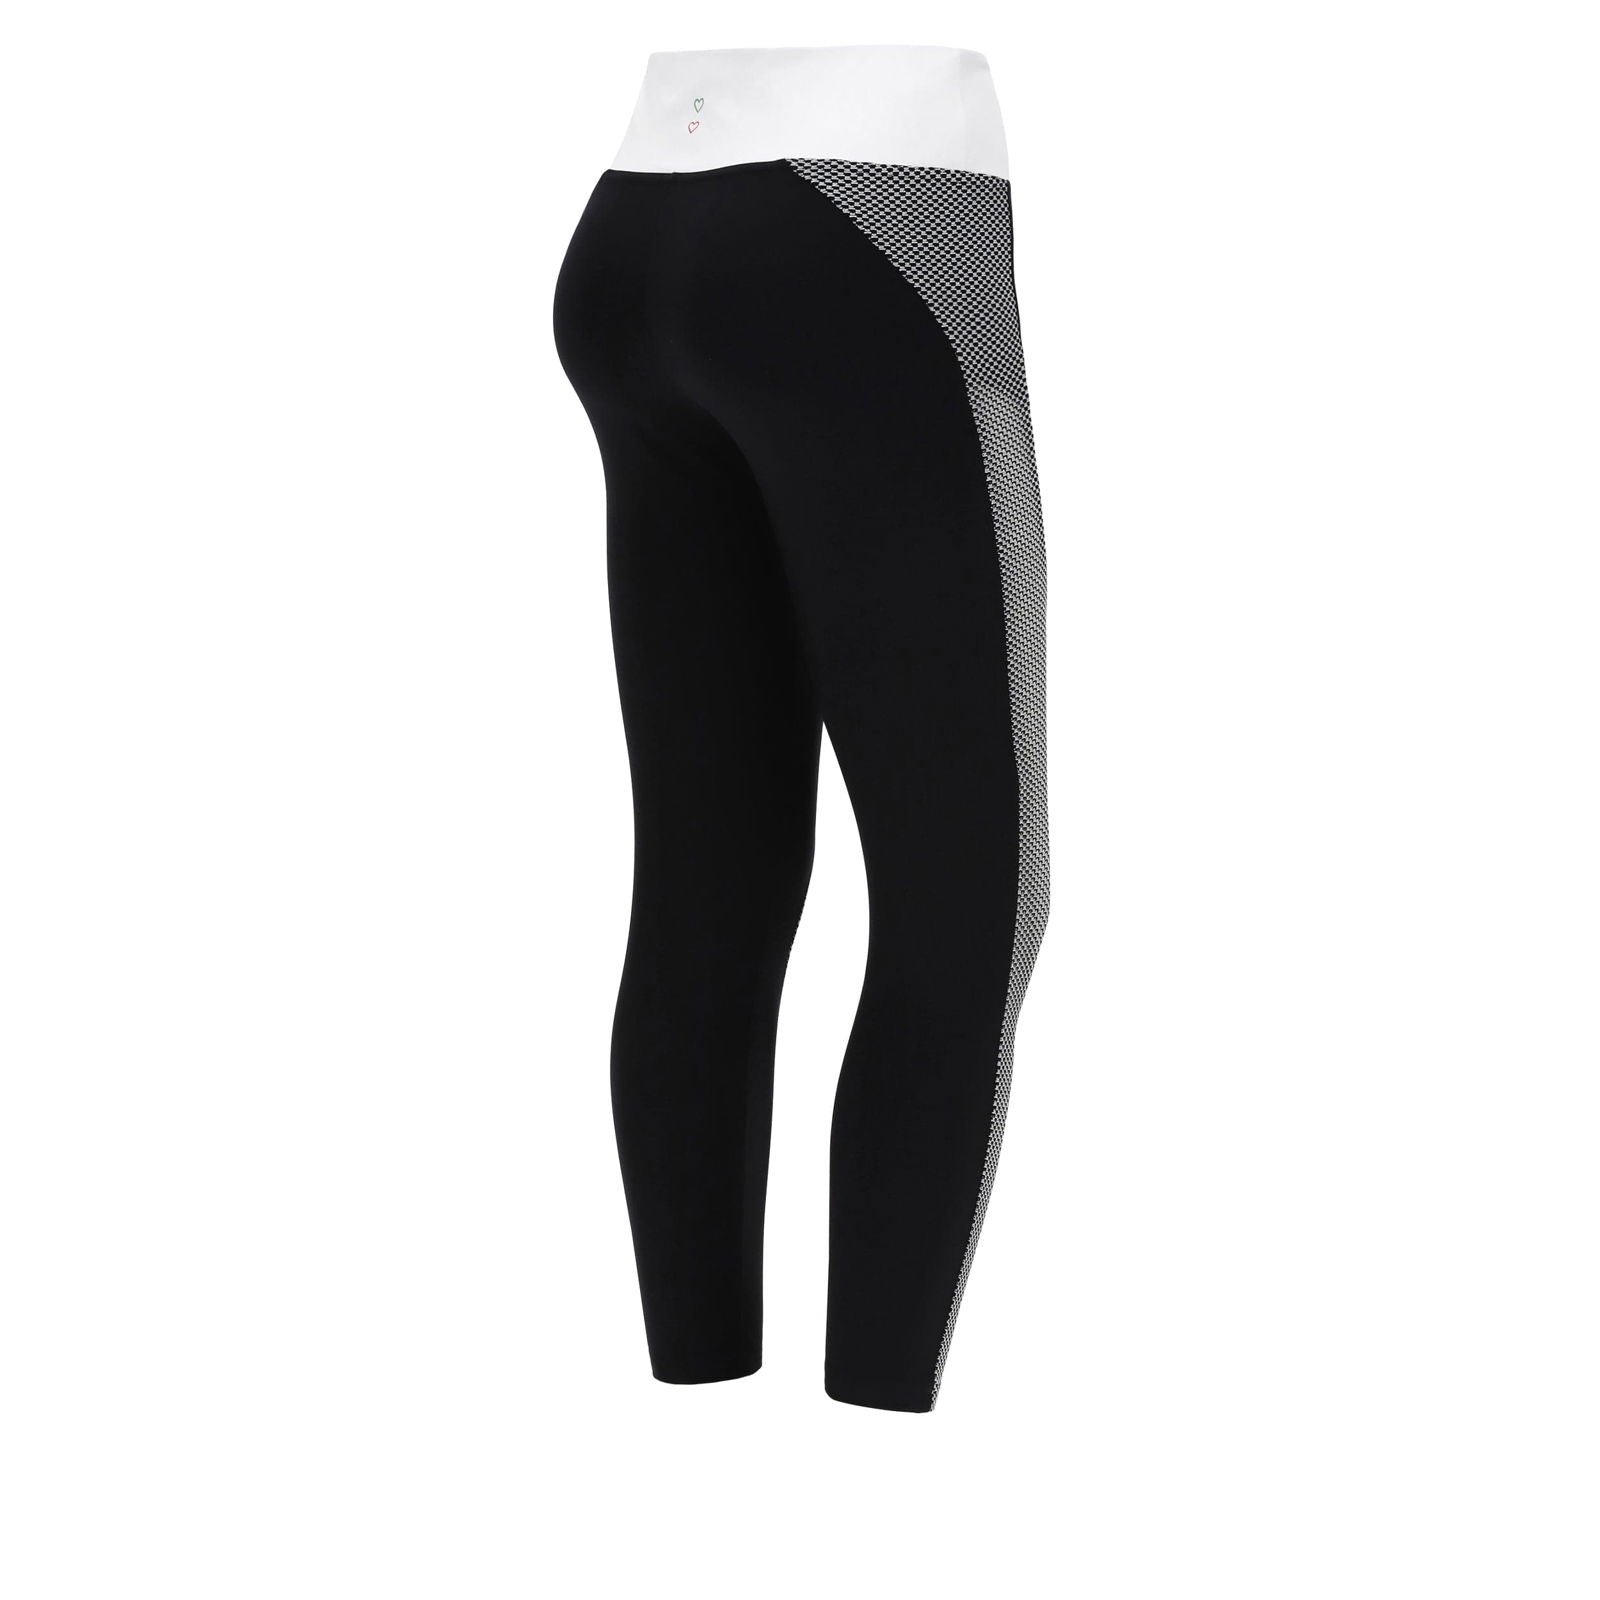 SuperFit Activewear - Mid Rise - 7/8 Length - Black + White Pattern 1